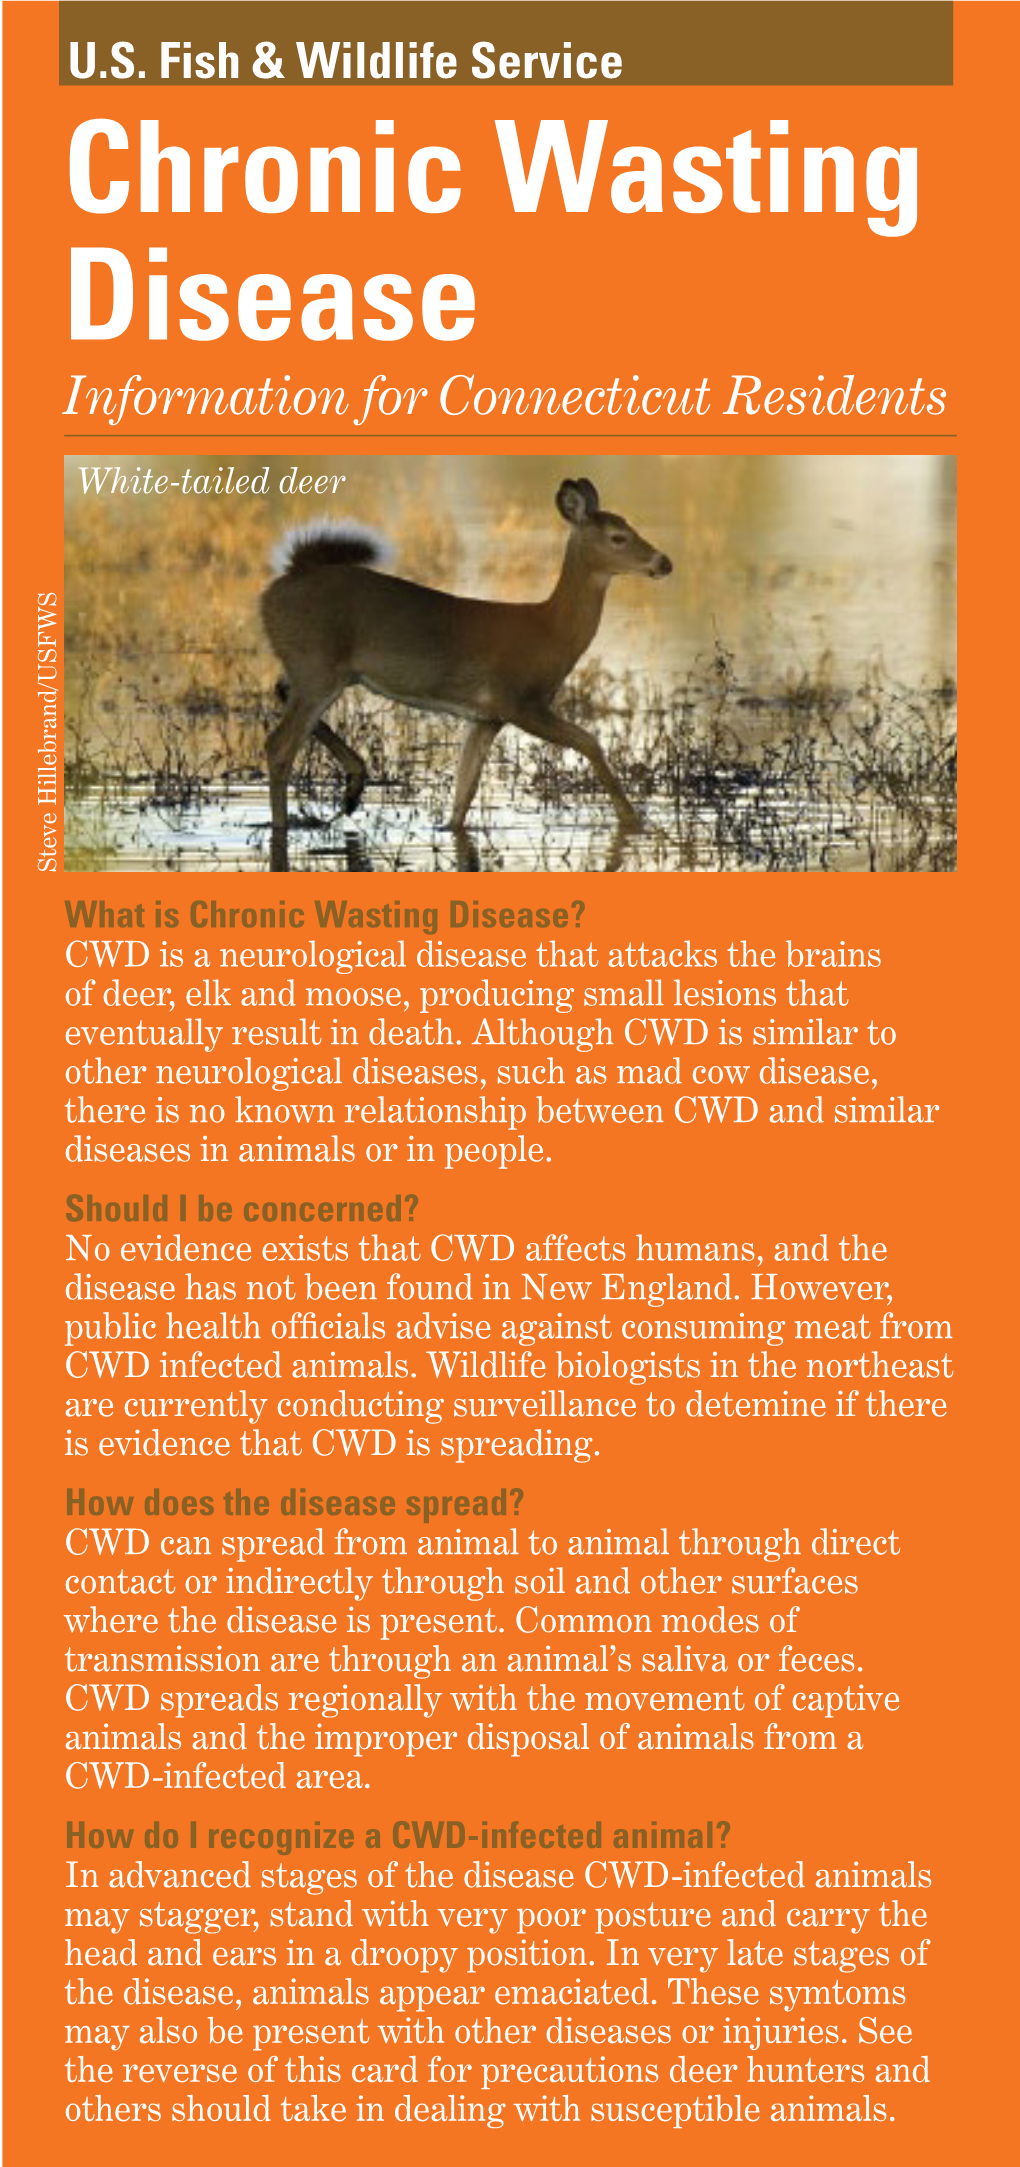 Chronic Wasting Disease Information for Connecticut Residents